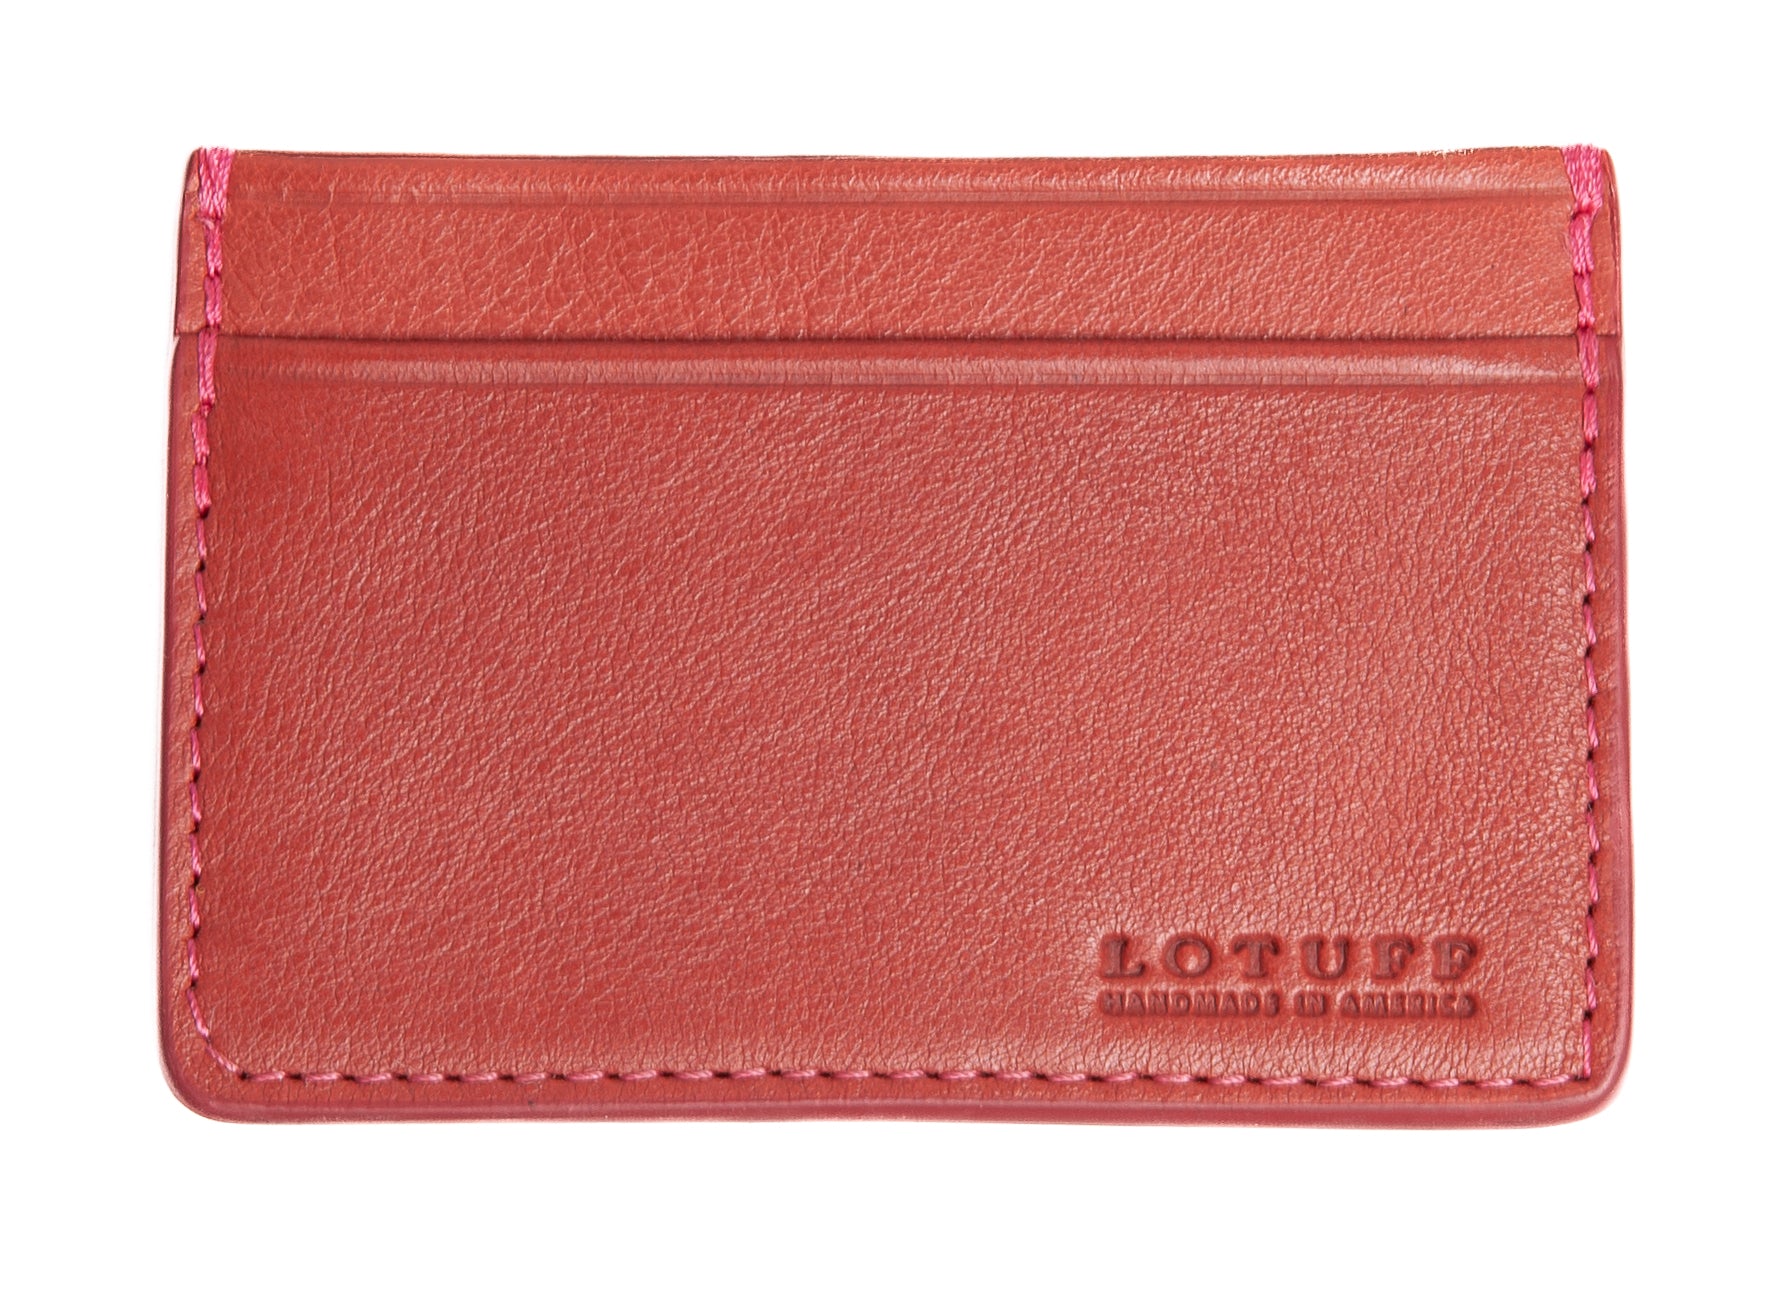 Leather Credit Card Wallet Rosewood